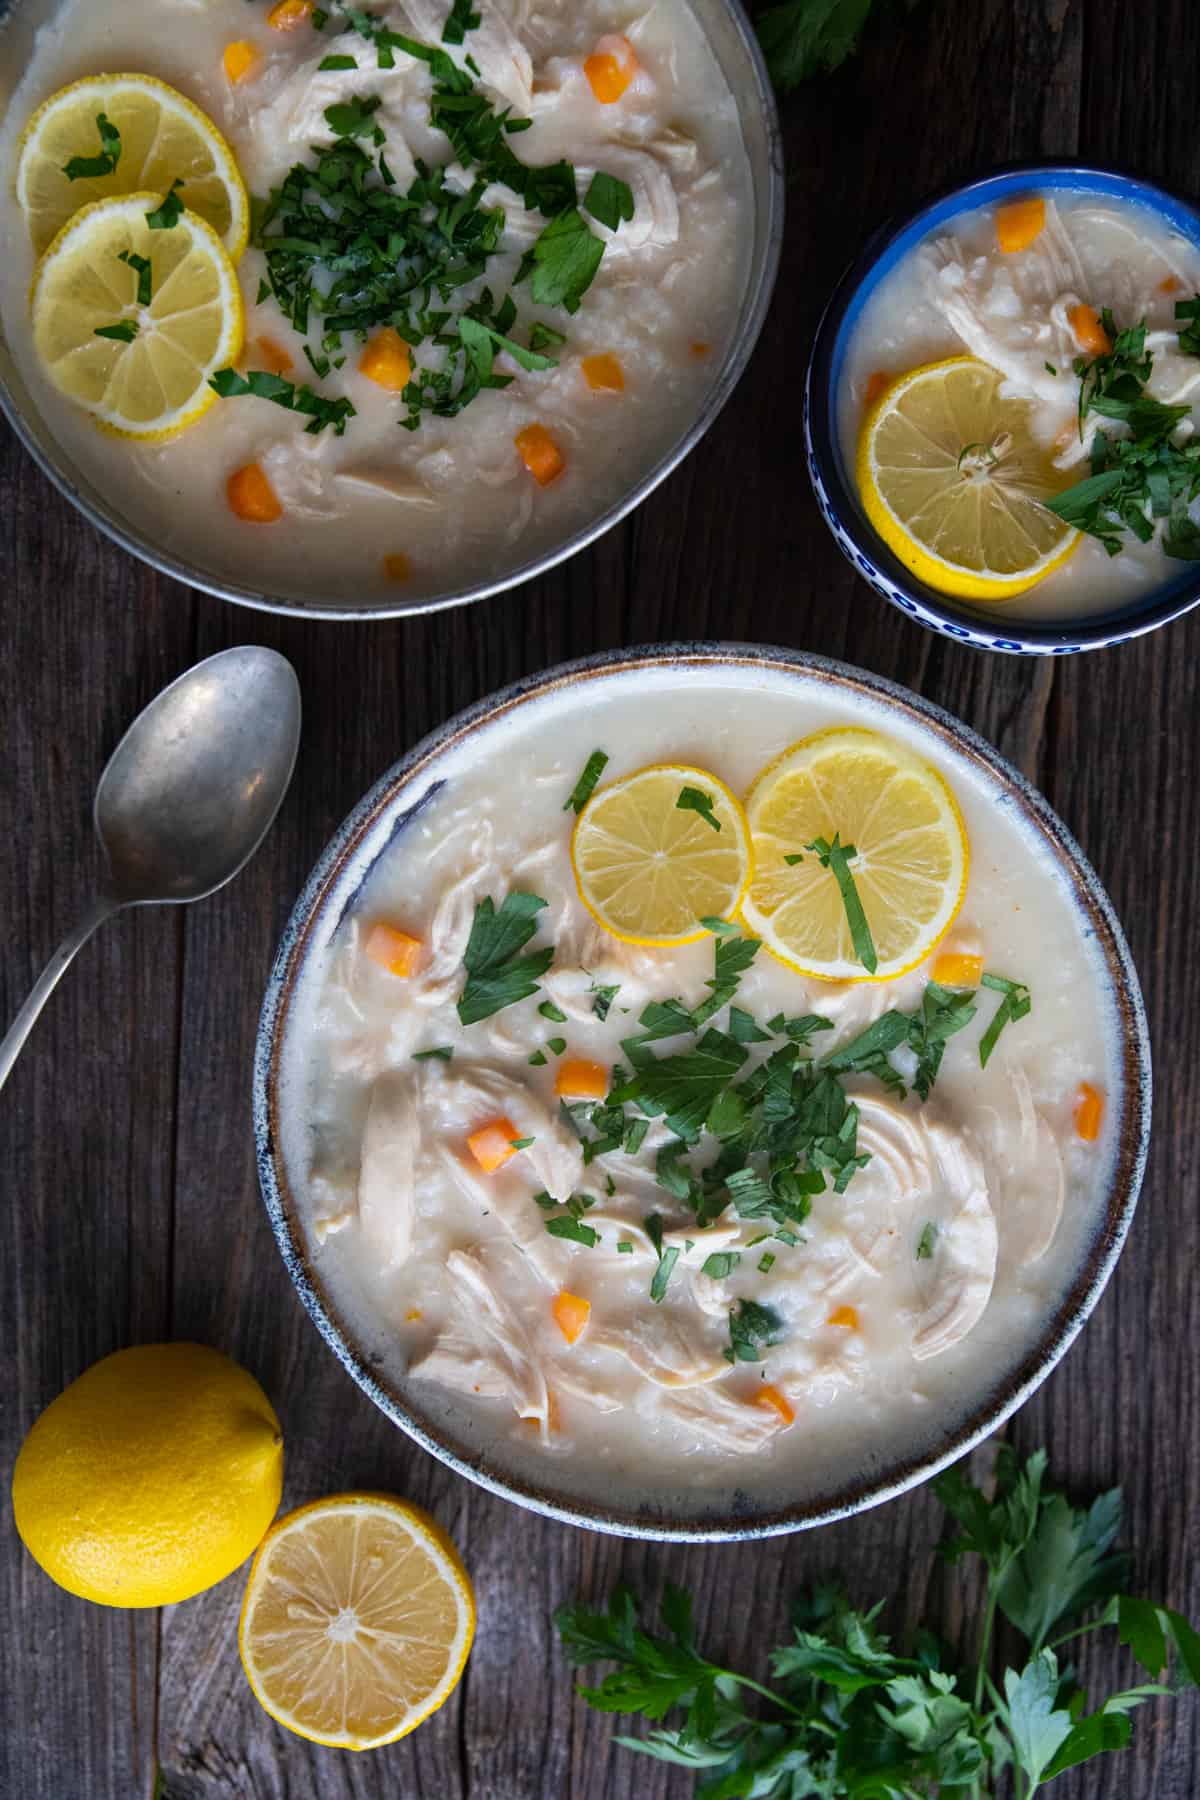 This avgolemono soup recipe is comforting with bright flavors. Made with the classic egg lemon sauce, avgolemono, this Greek lemon chicken soup is so satisfying. Follow along for all my tips and instructions to make this authentic Greek chicken soup.
